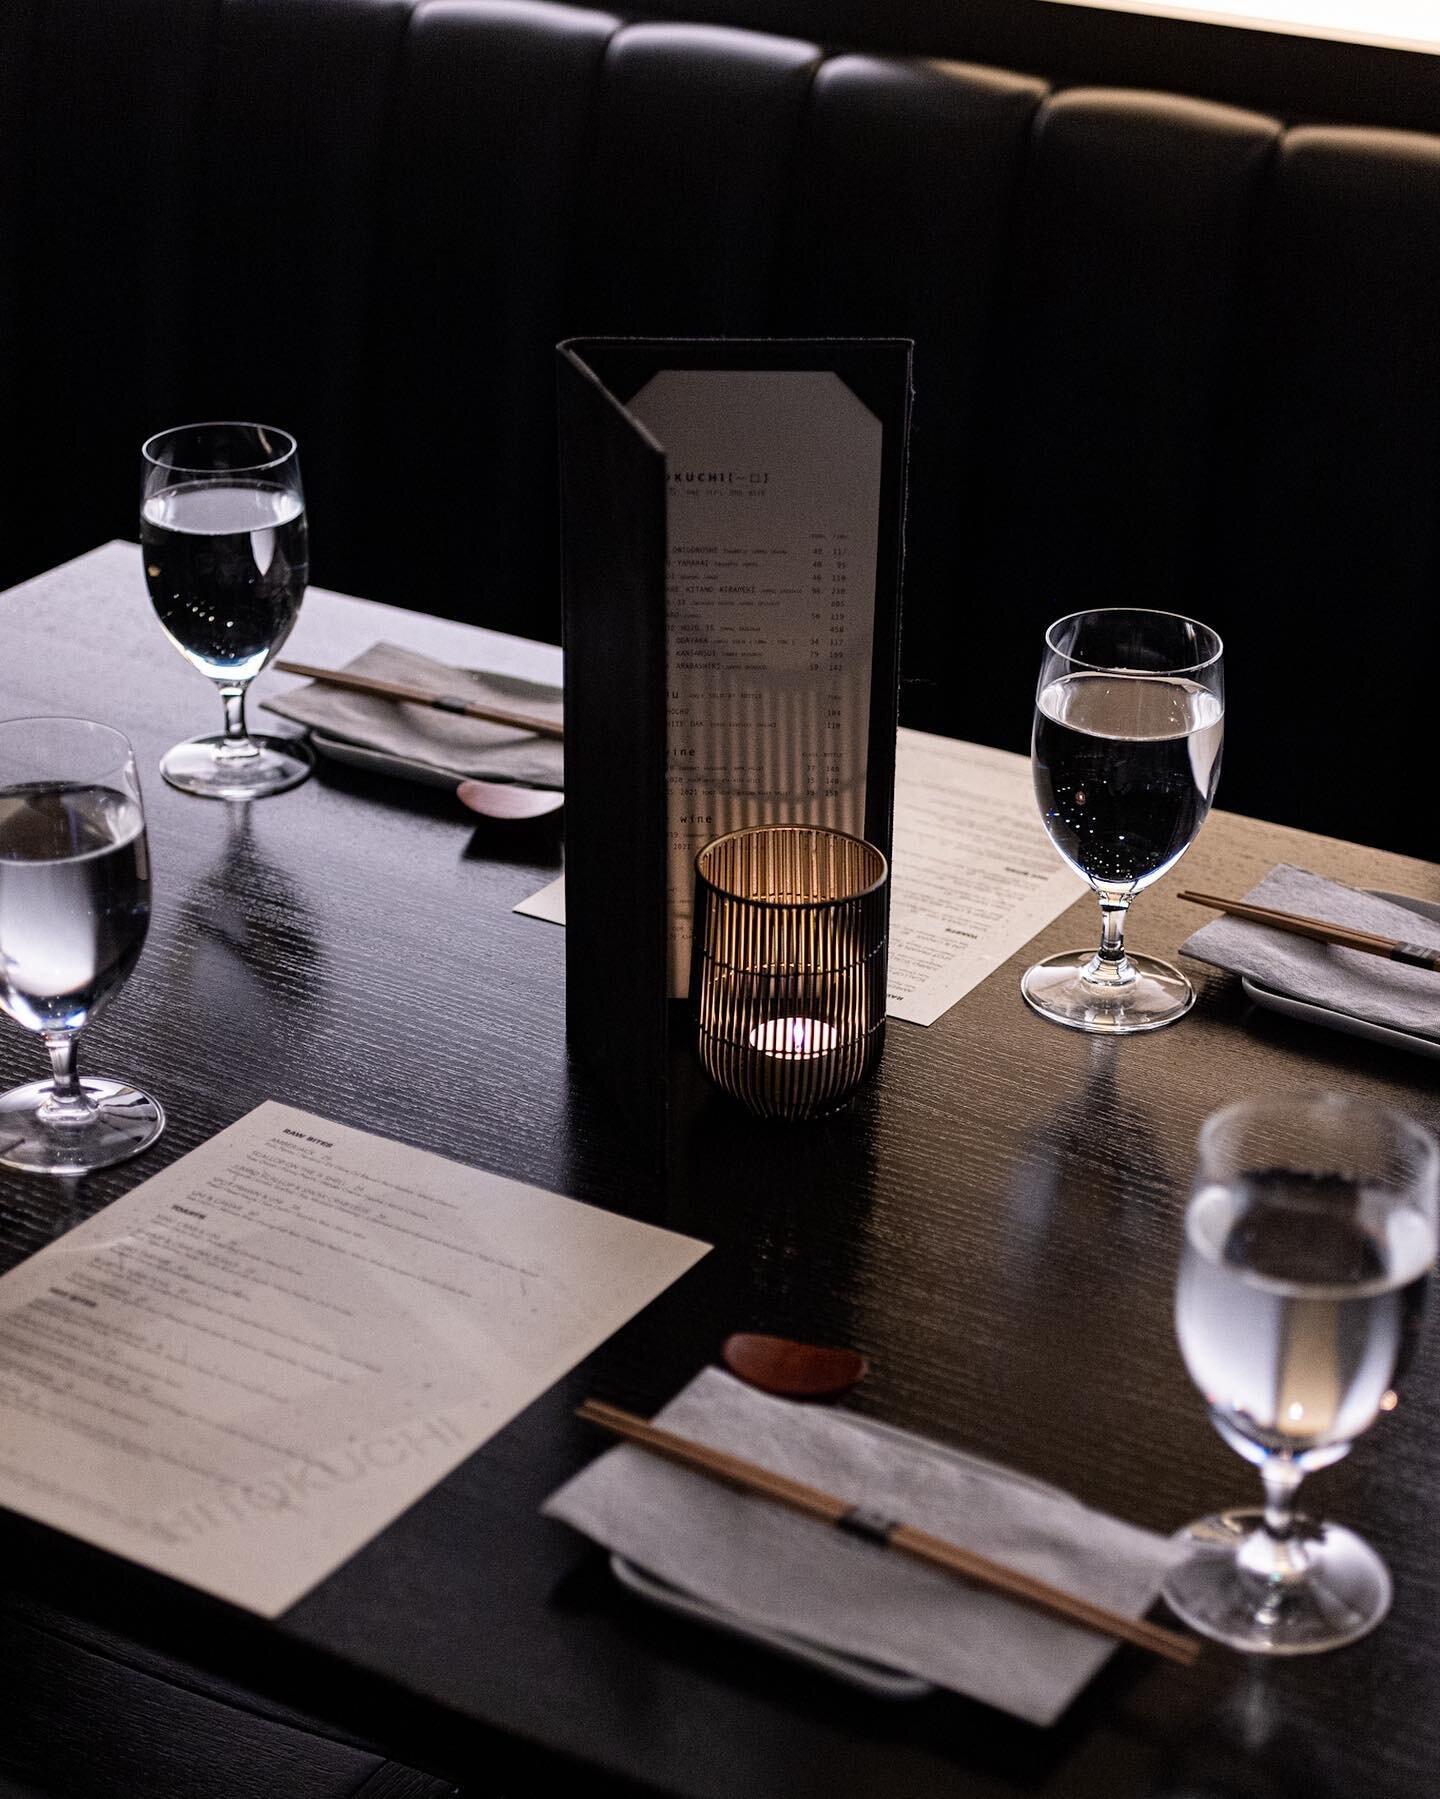 Hitokuchi offers luxurious Japanese cuisine with premium raw seafood and a strong focus on umami, served in shareable, amuse-bouche-sized dishes paired with a large variety of sake.

Grab a reservation through our website.